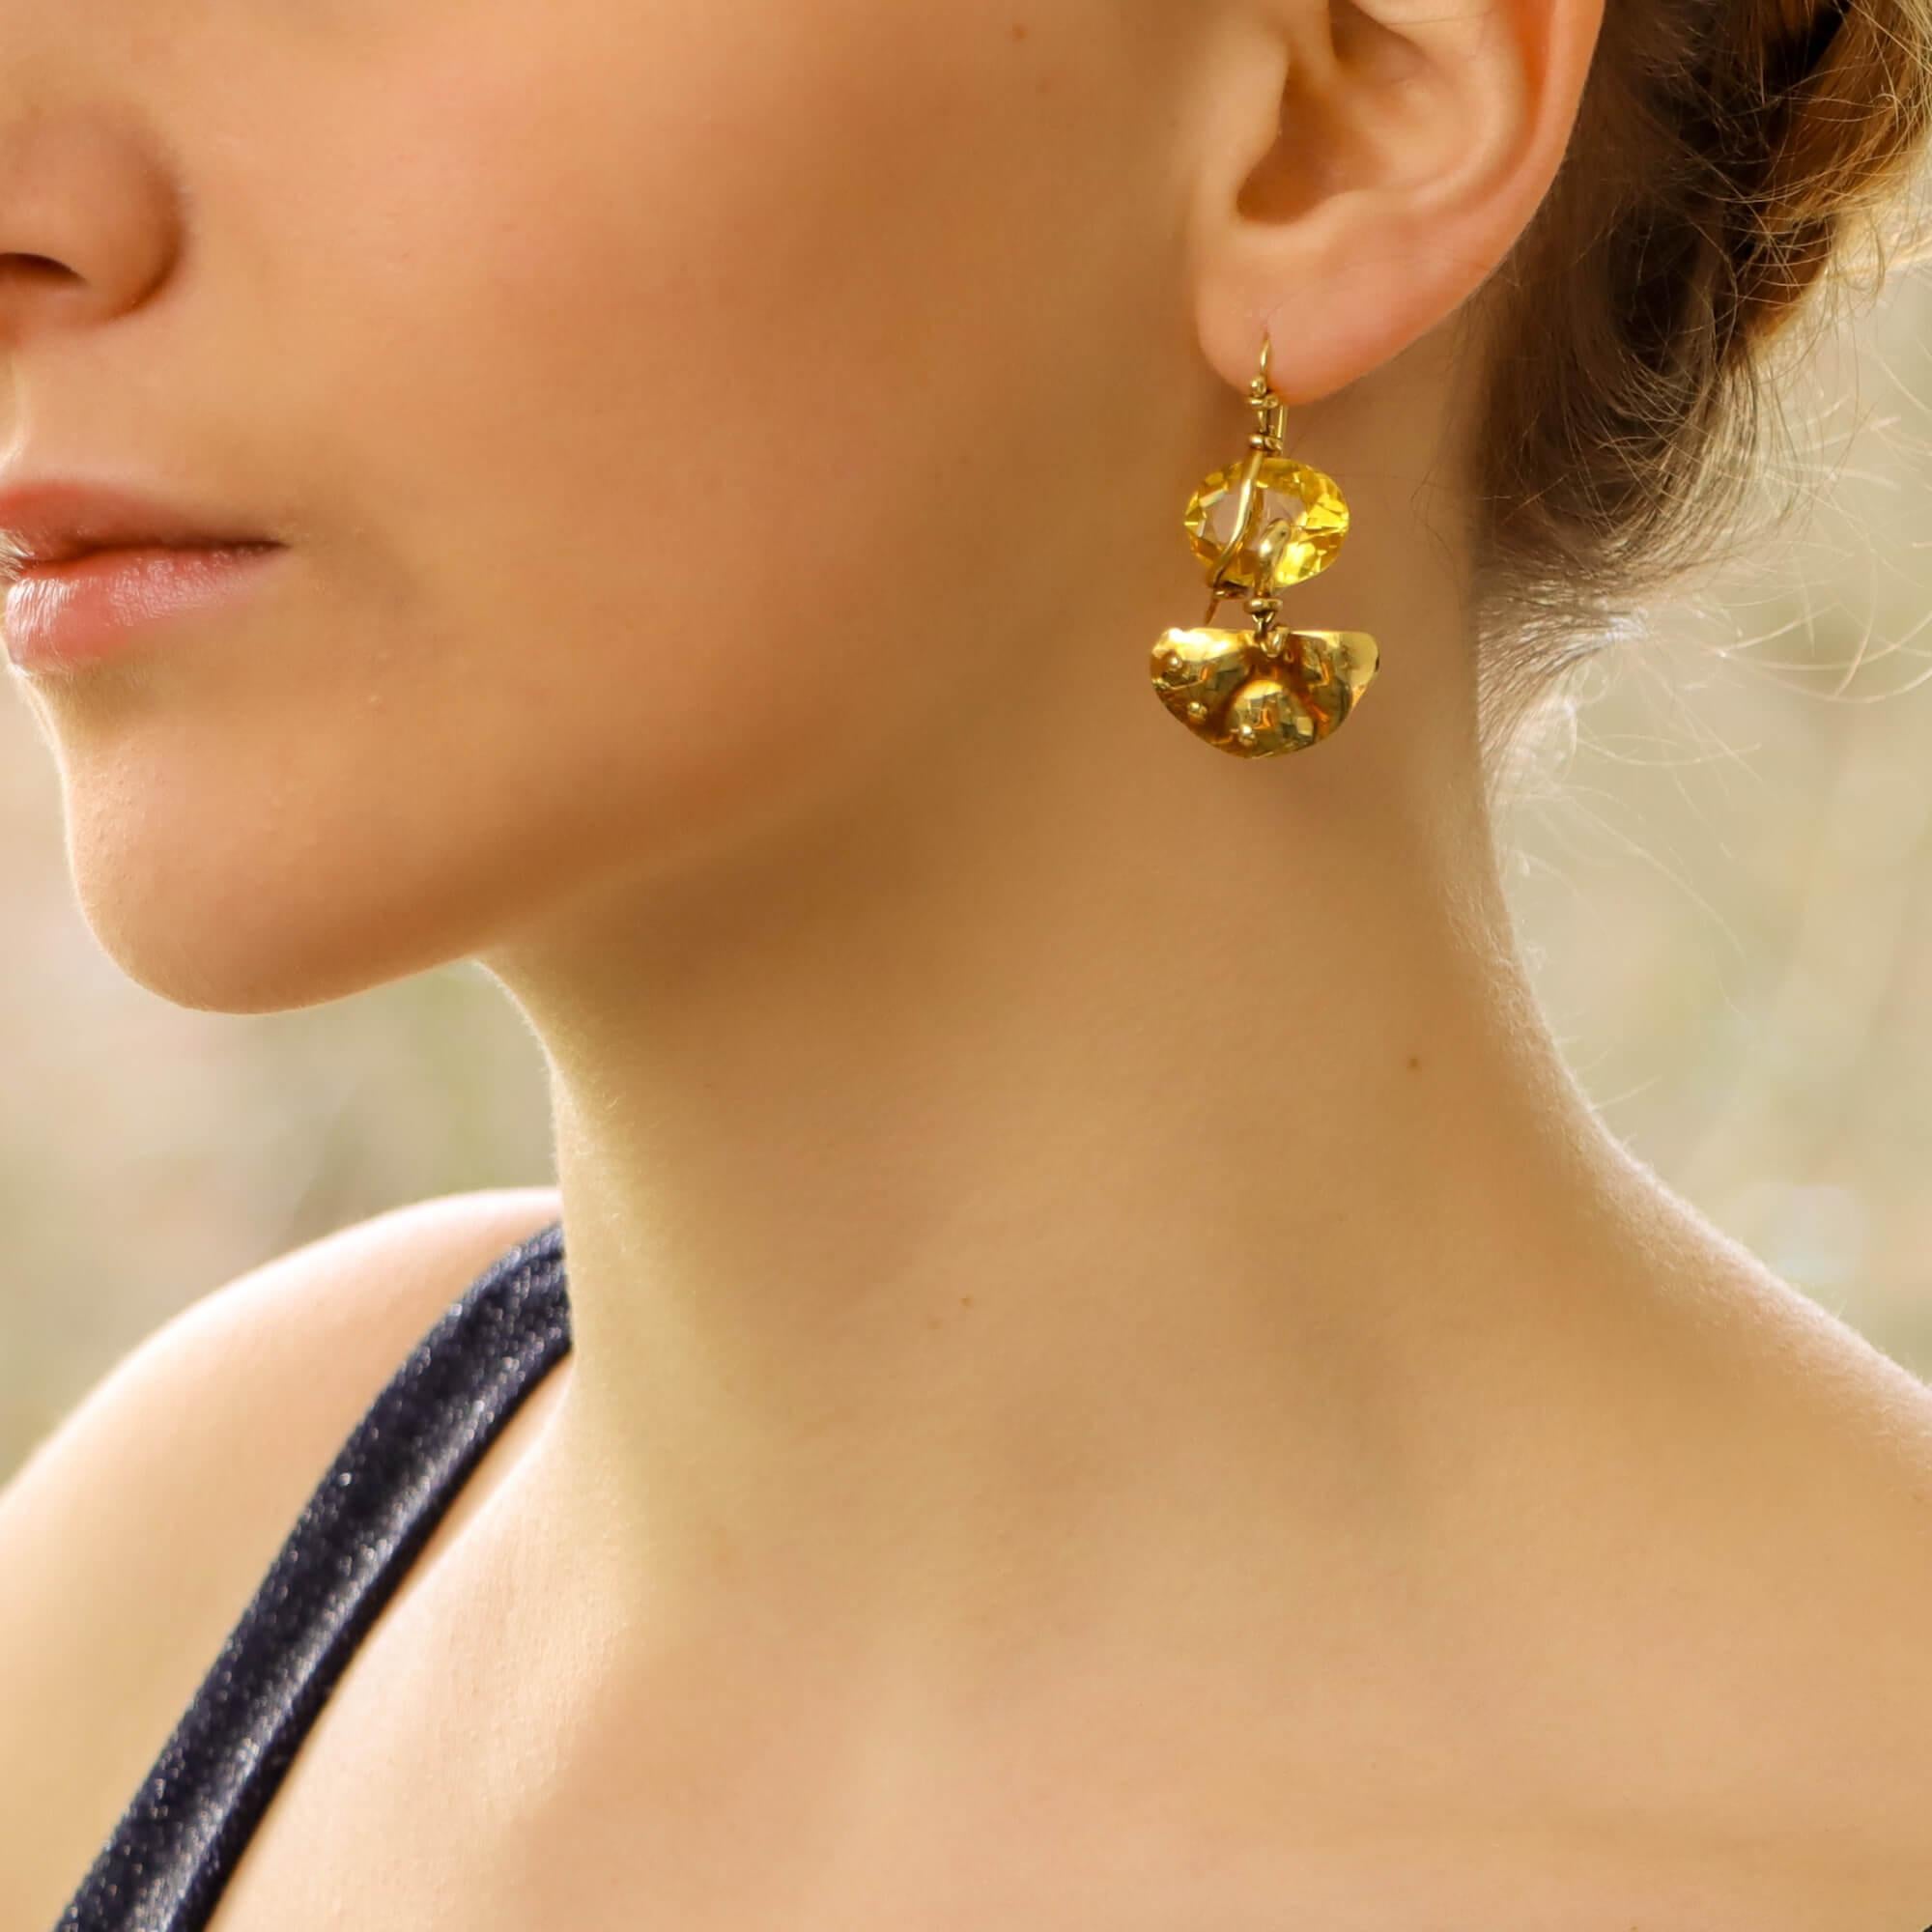 A beautiful pair of naturalistic citrine snake earrings set in 18k yellow gold. 

Each earring is prominently set with an oval cut citrine which is wrapped within a snake's tail made of gold. The snake detailing is incredibly subtle yet effective